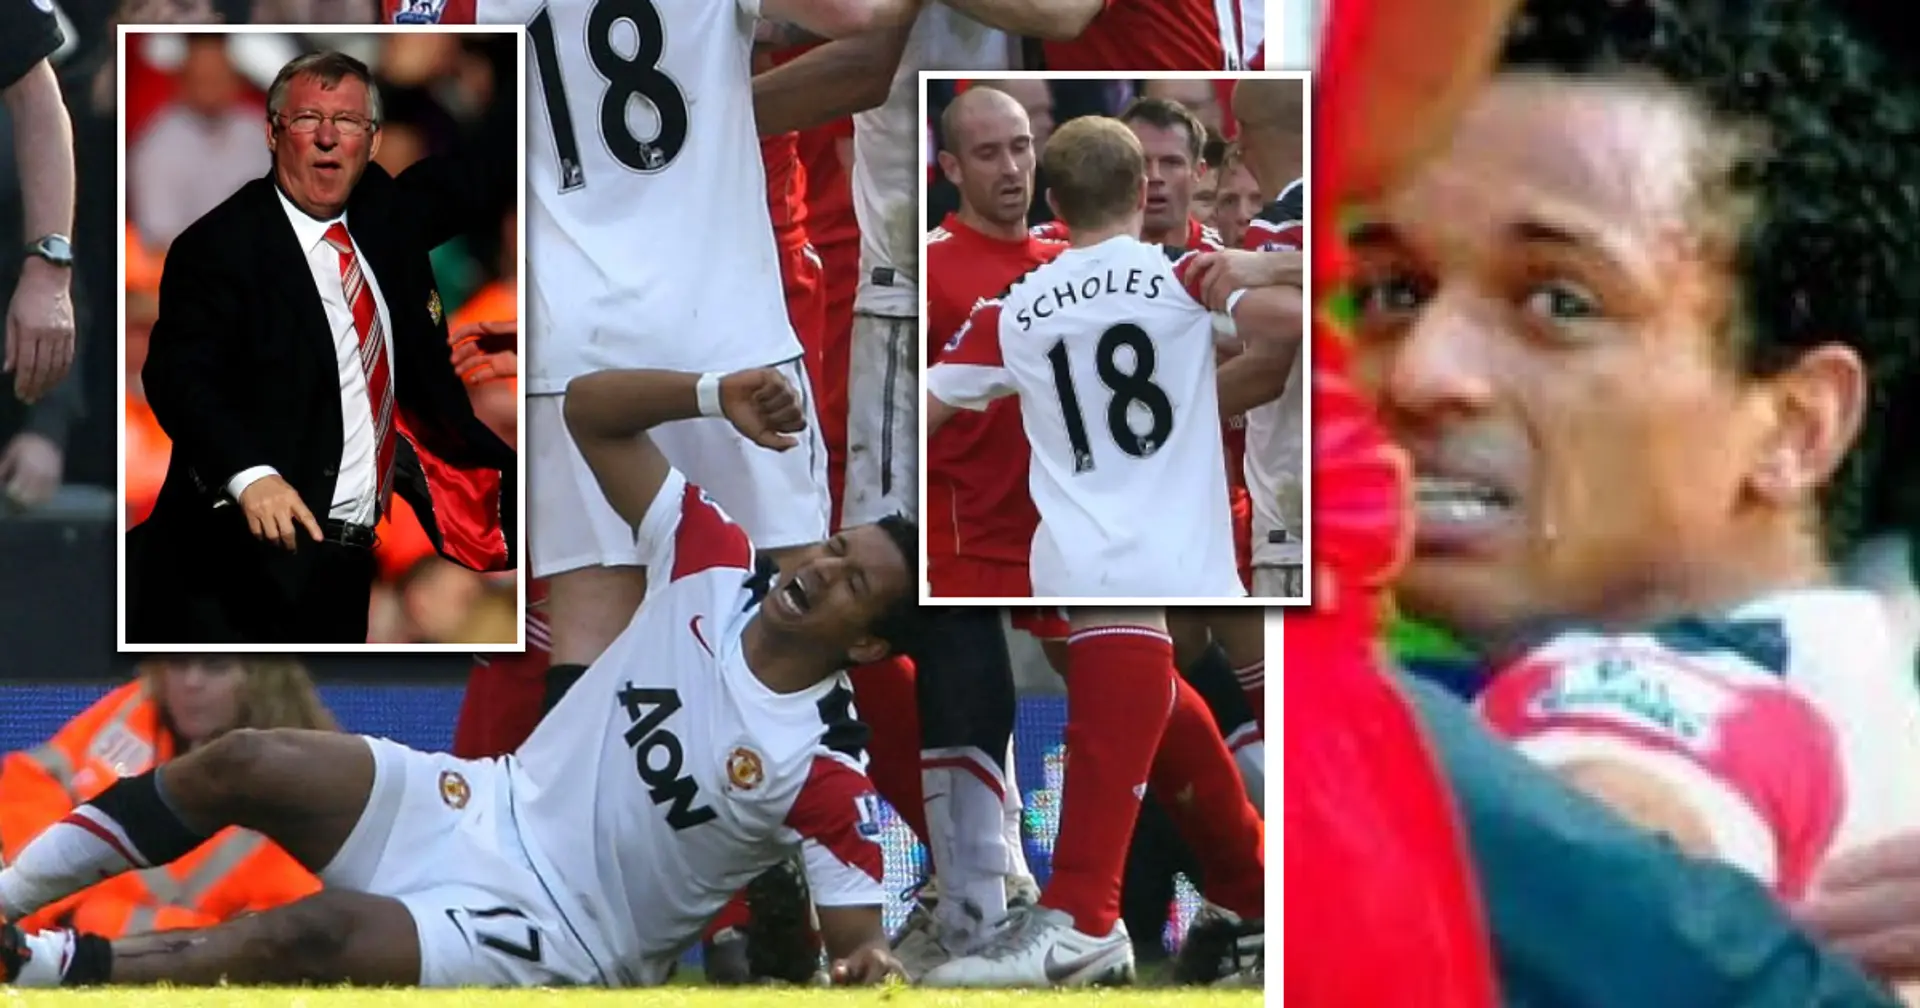 'Scholsey came and he saw Nani crying': Recalling how Paul Scholes reacted to Nani crying at Anfield